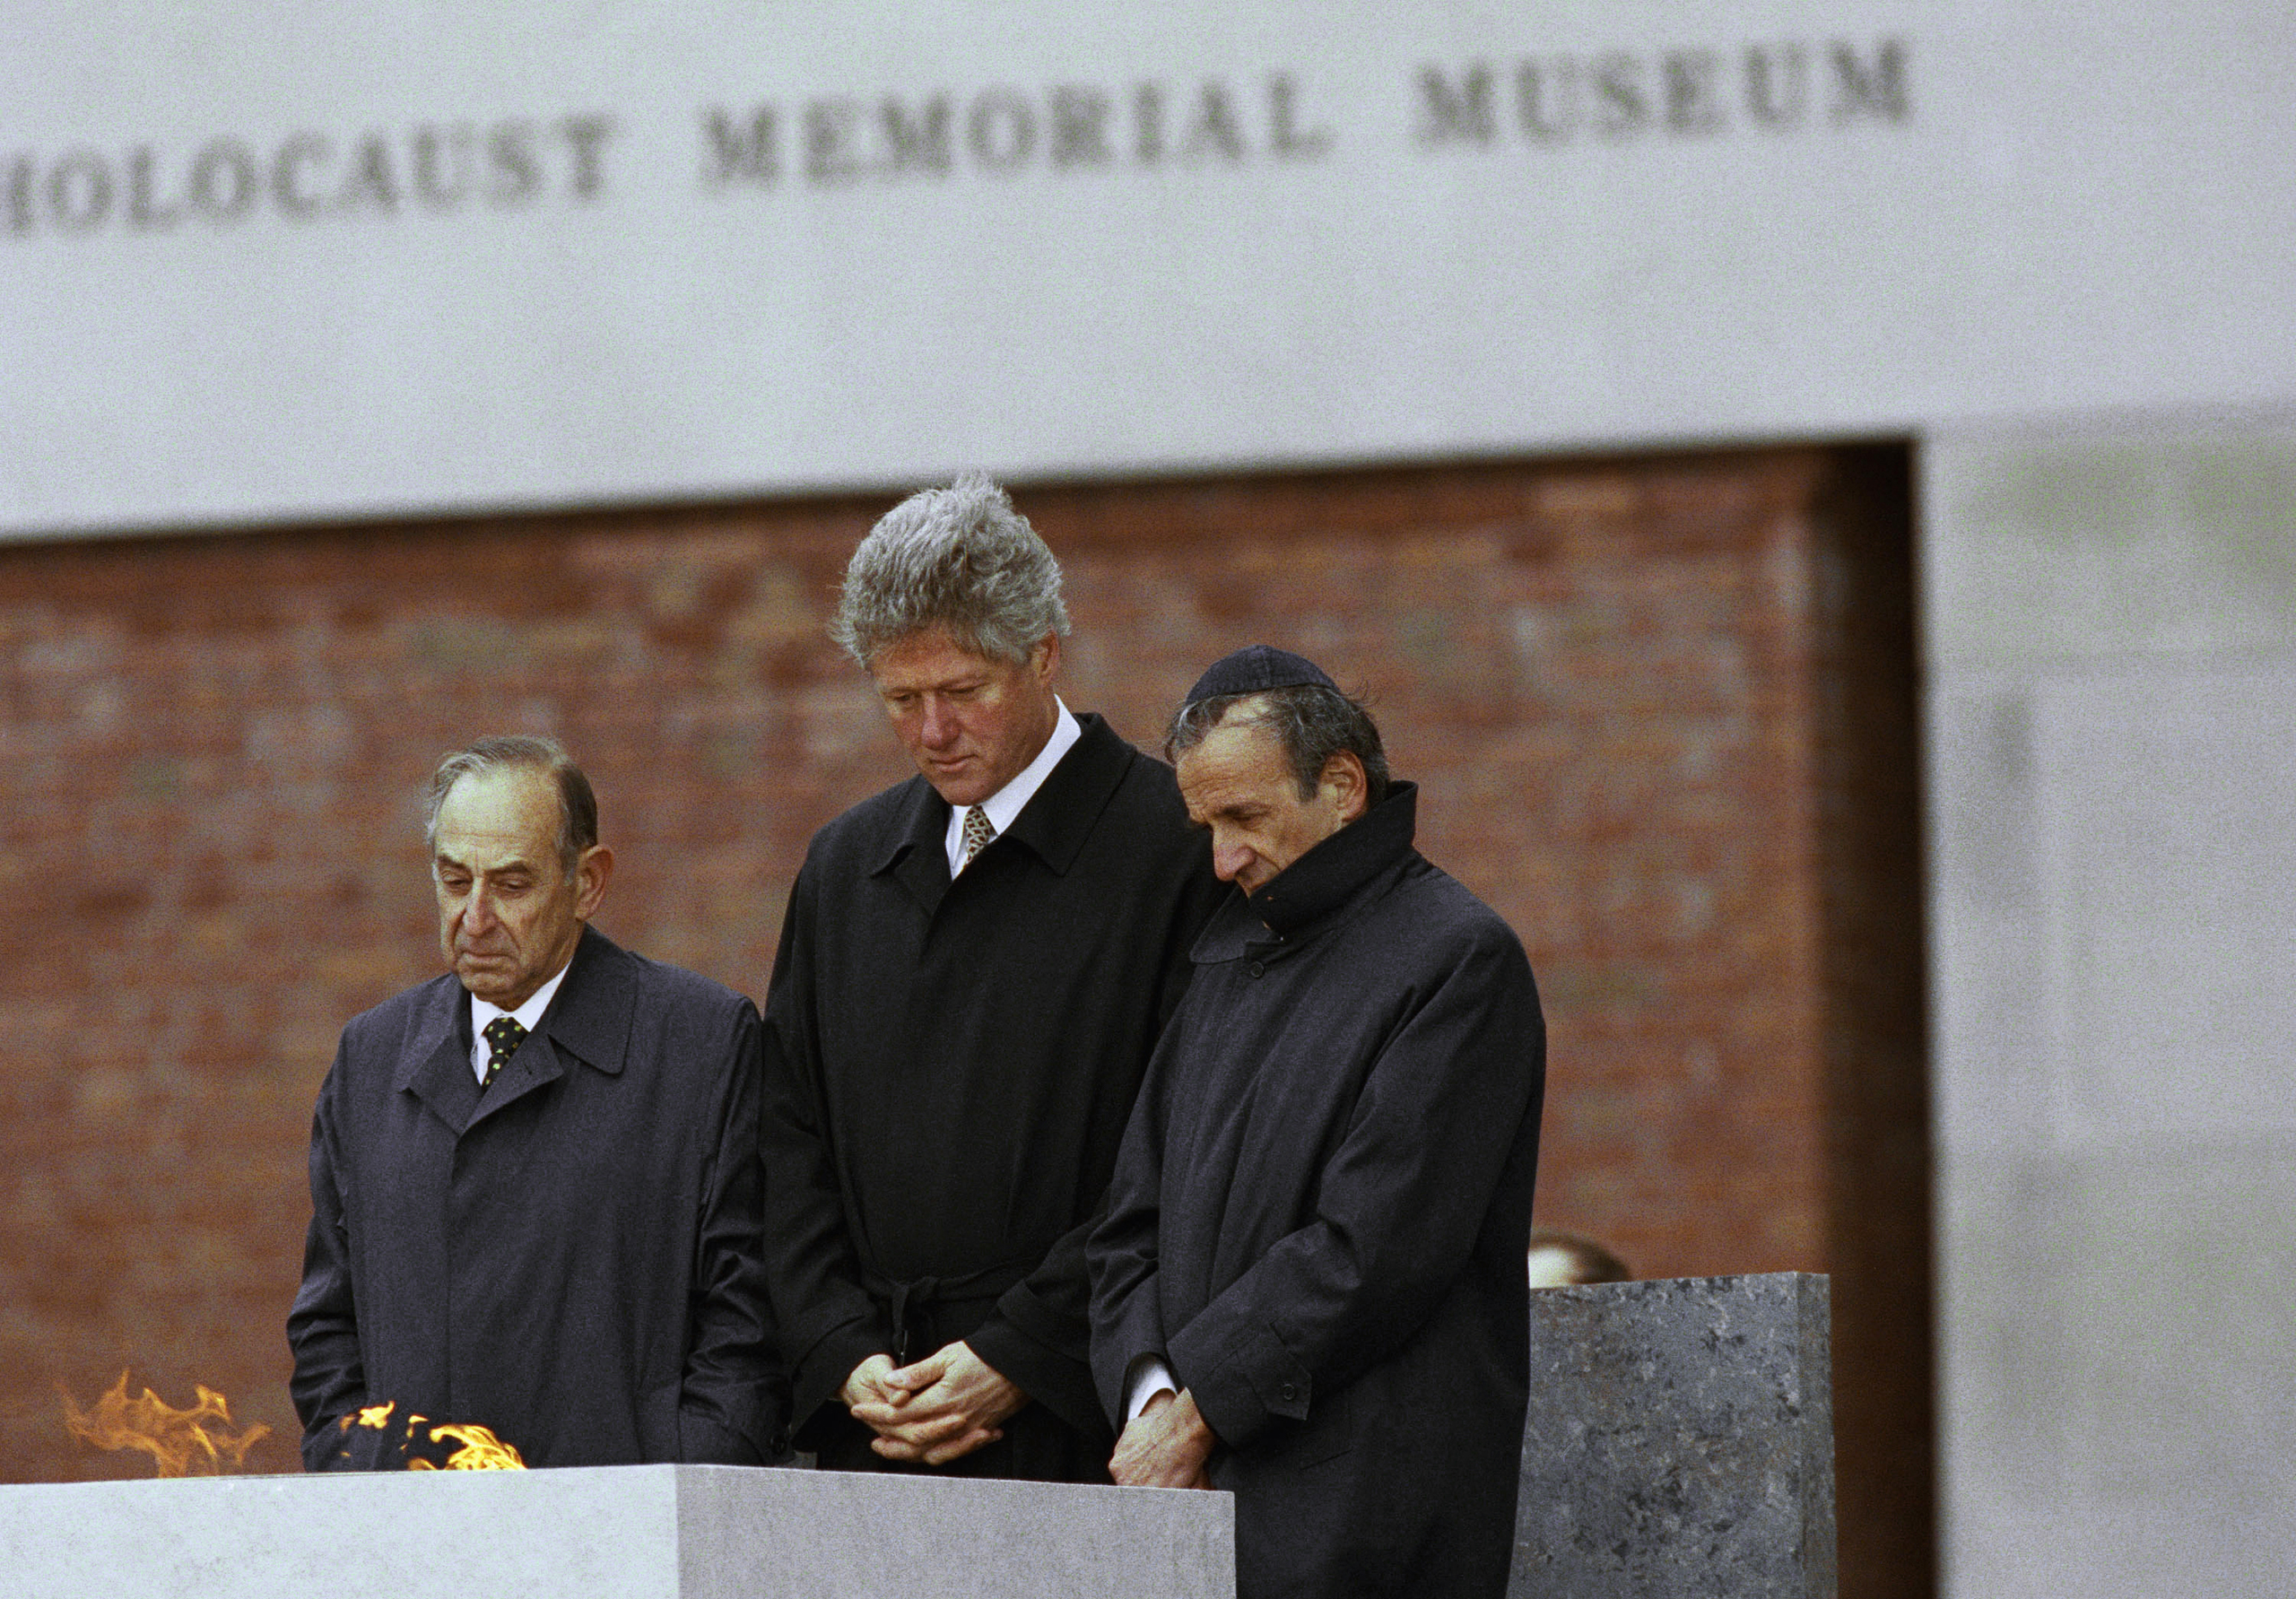 President Bill Clinton, center, along with Bud Meyerhoff, left, chairman of the U.S. Holocaust Council, and Elie Wiesel, founding chairman of the U.S. Holocaust Memorial Council, pause after lighting an Eternal Flame during the dedication ceremony for the U.S. Holocaust Memorial Museum in Washington on April 22, 1993.